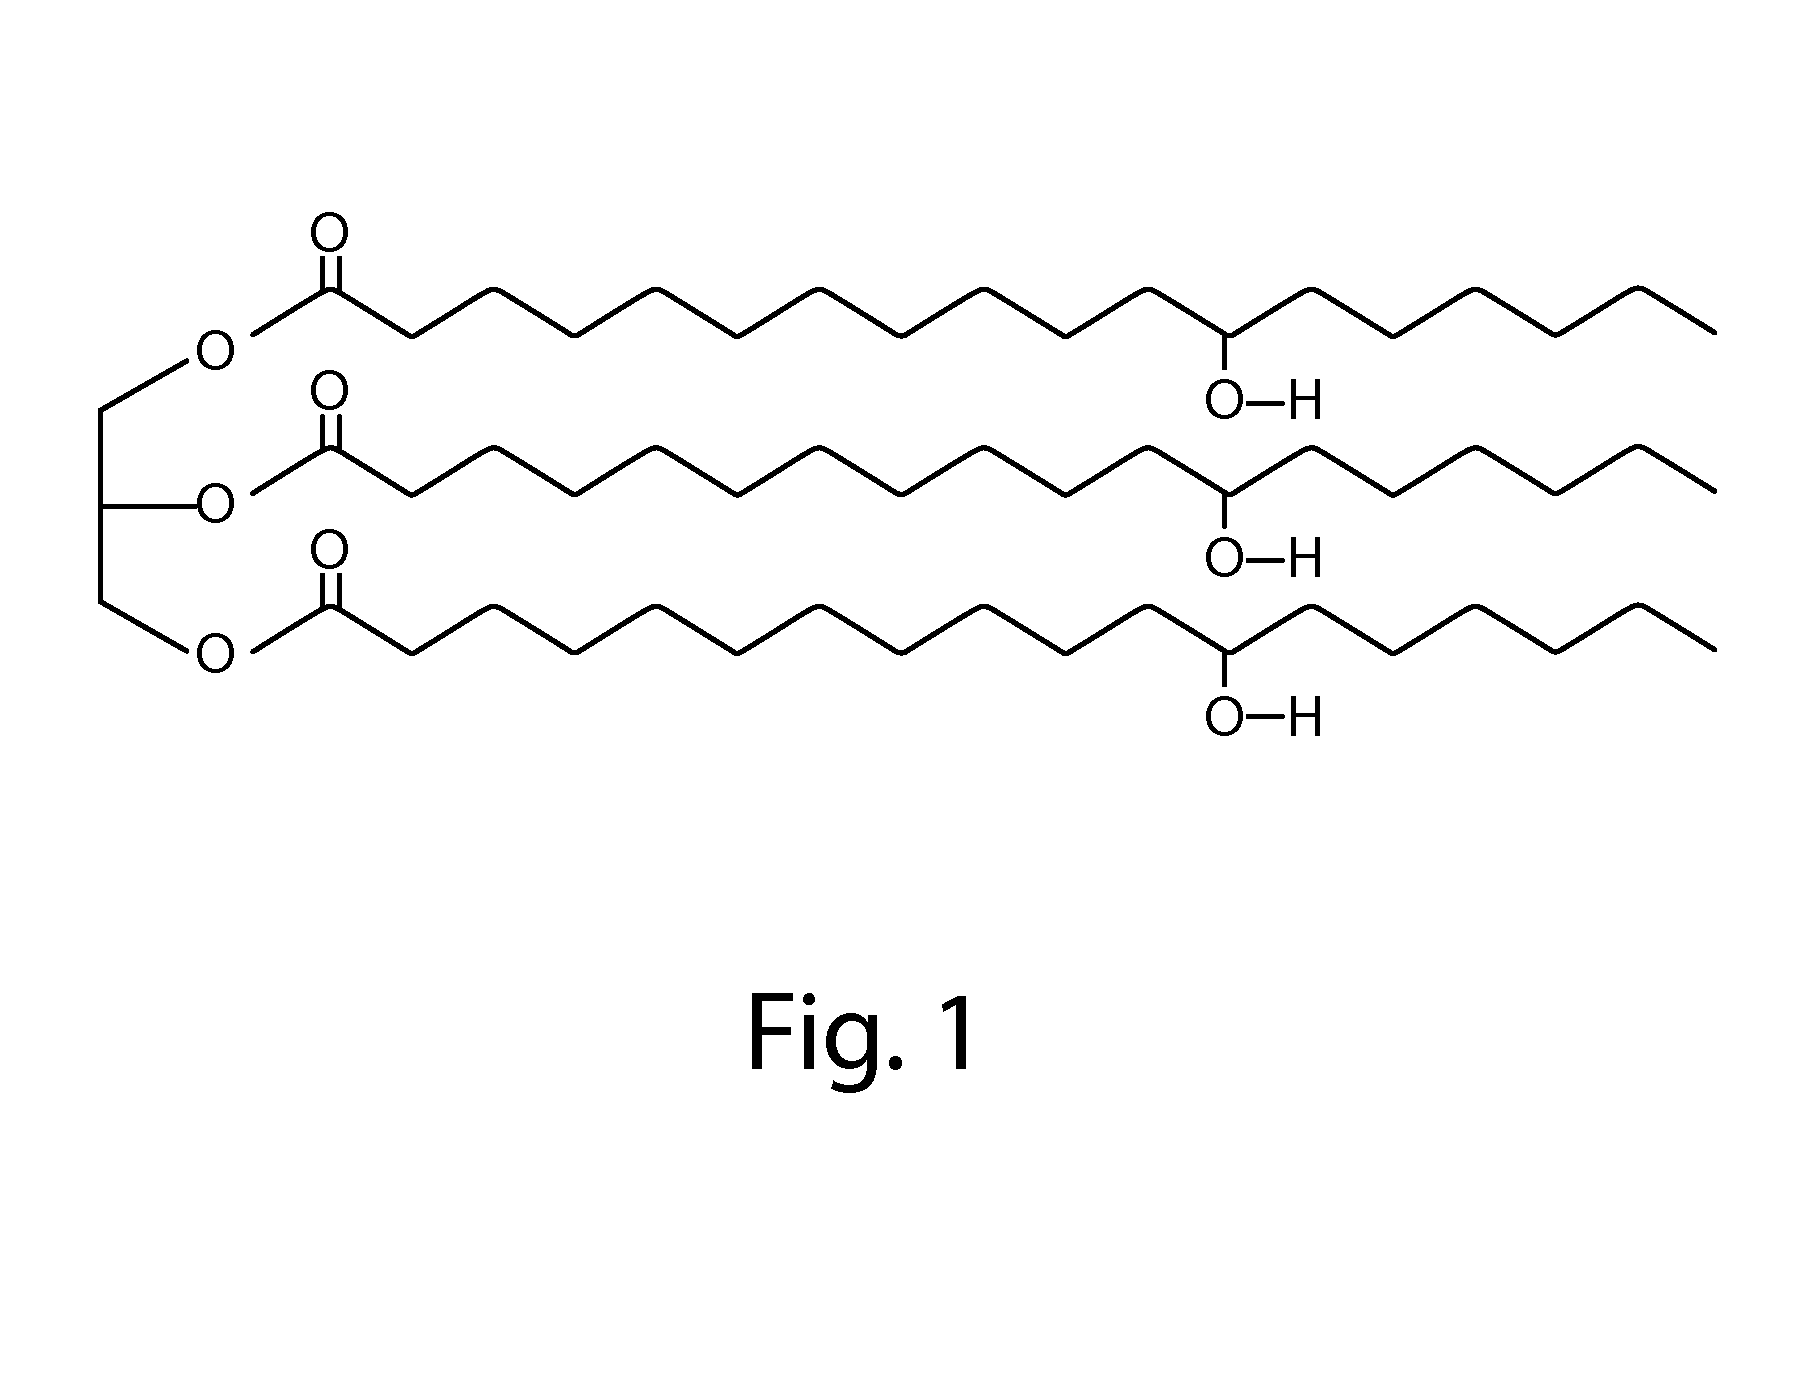 Methods of Molding Thermoplastic Polymer Compositions Comprising Hydroxylated Lipids